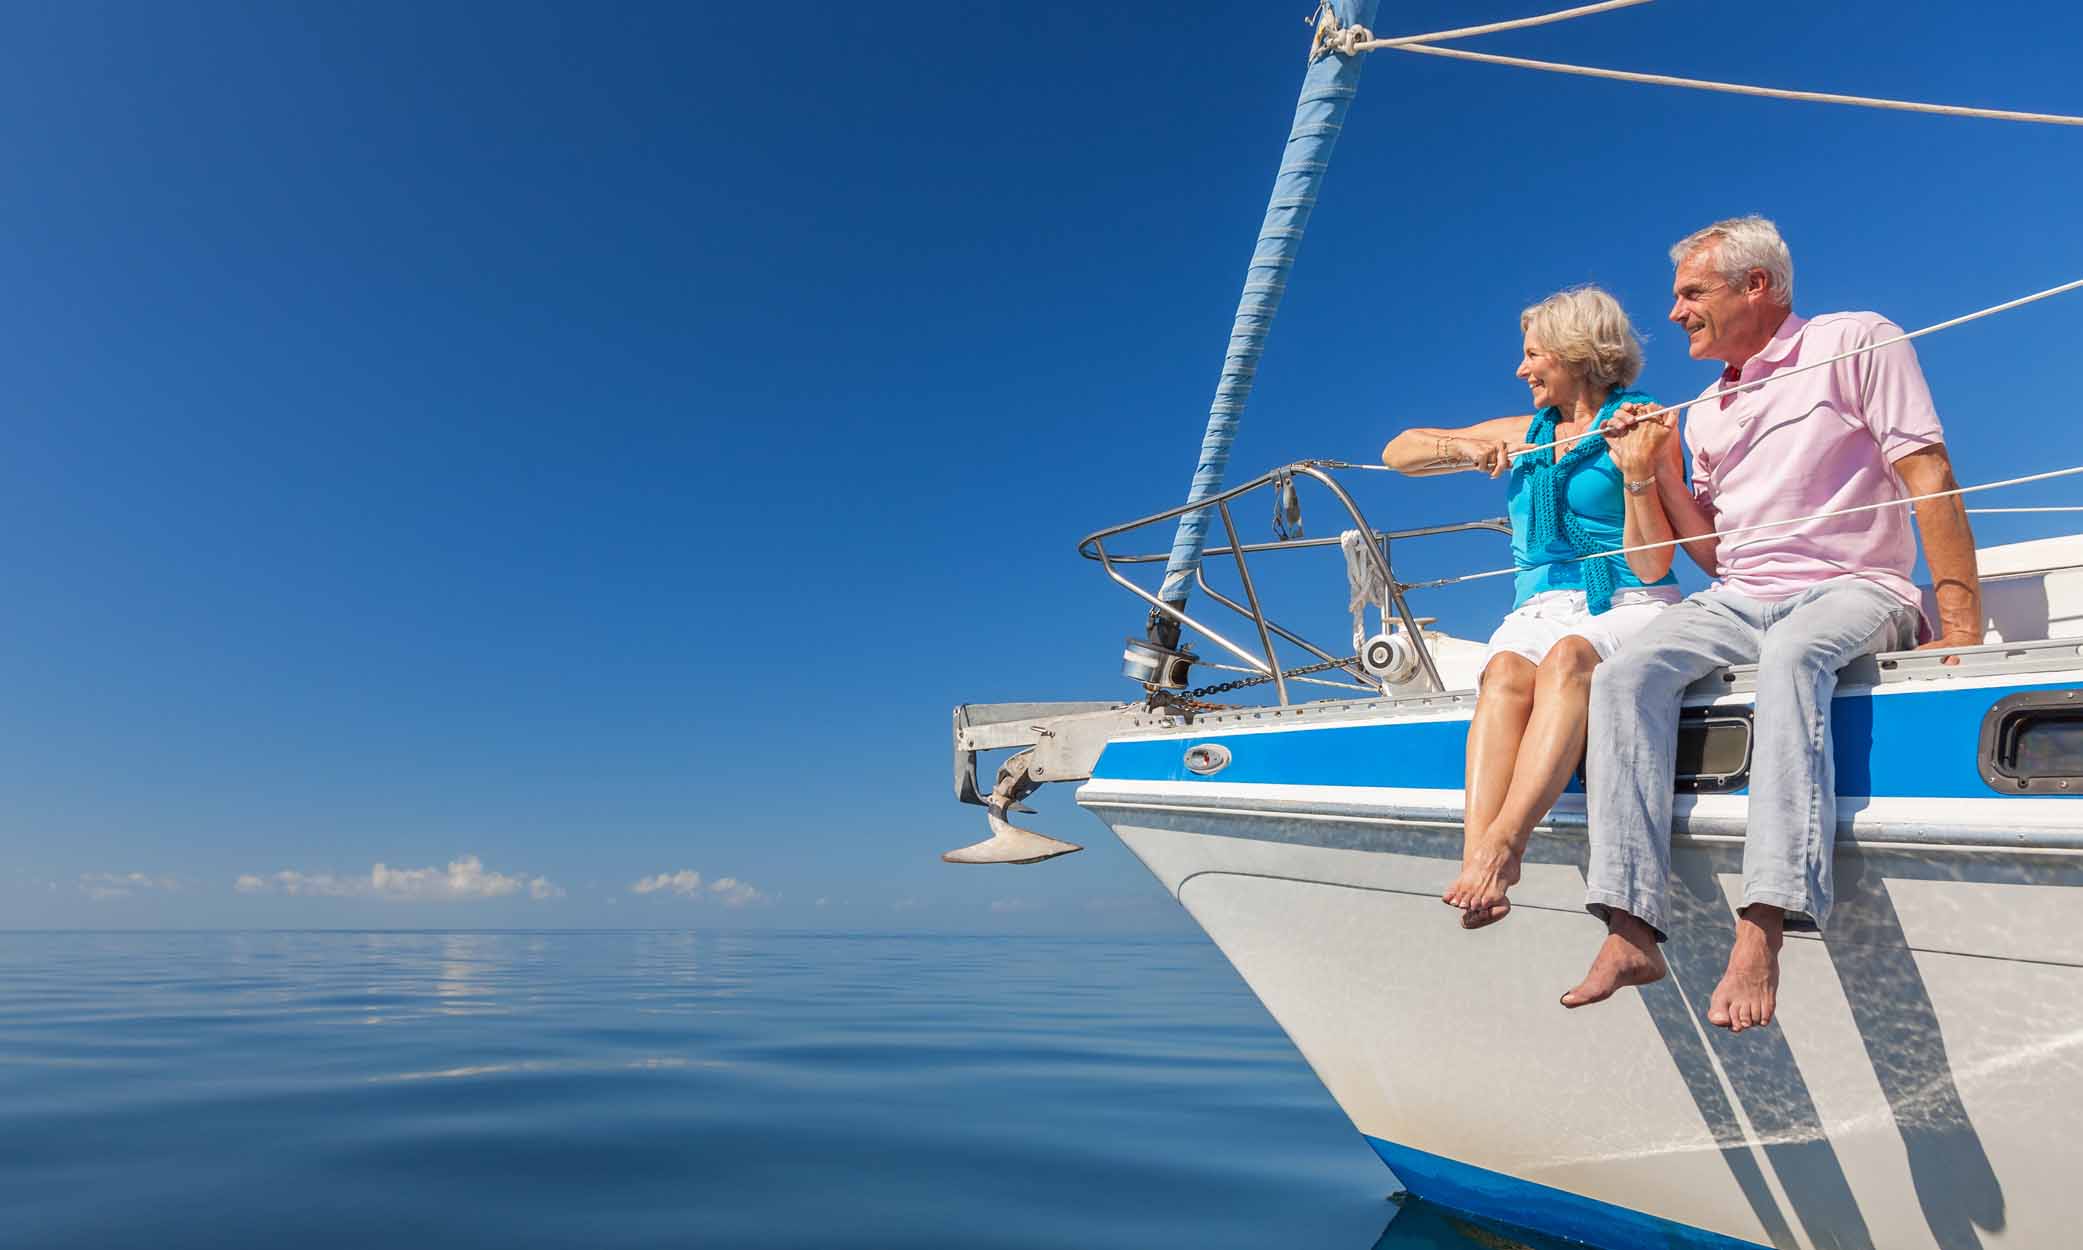 Calling all investors, where would you like to retire?